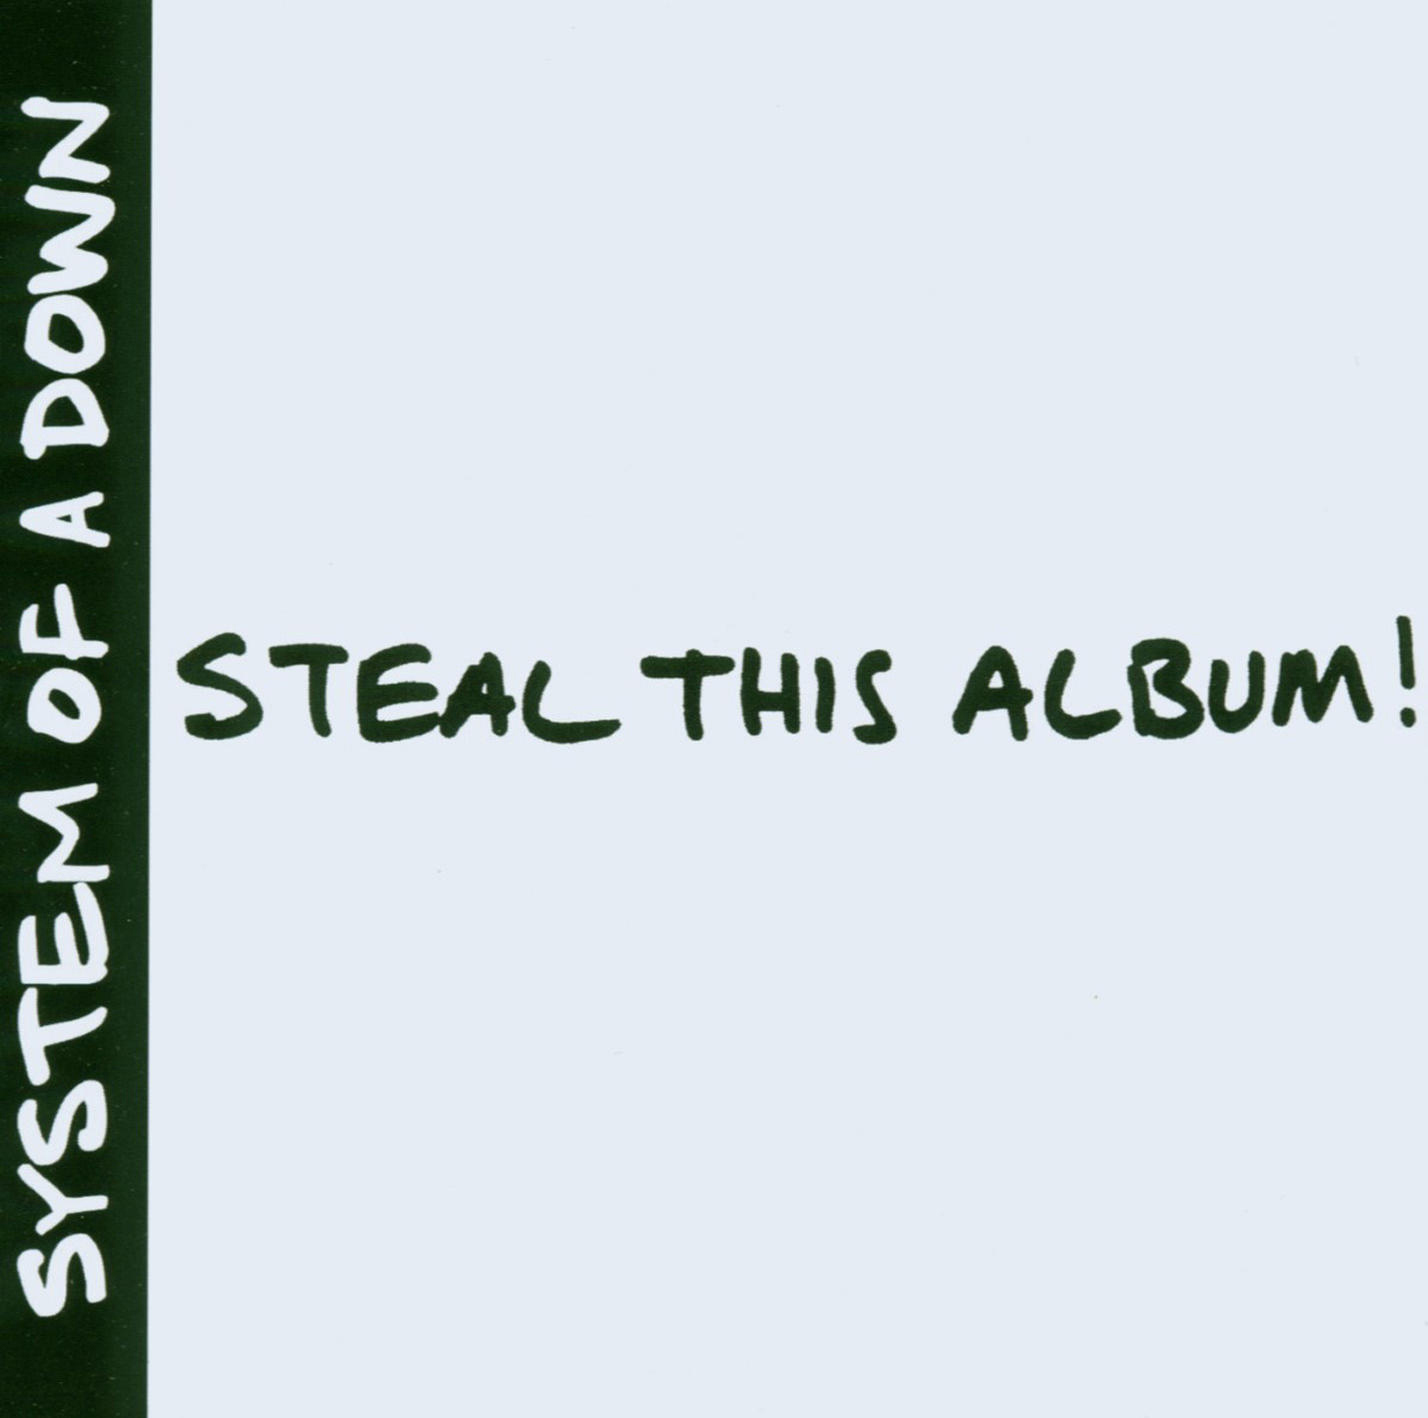 System Of A Down (Vinyl) This Album! Steal - 